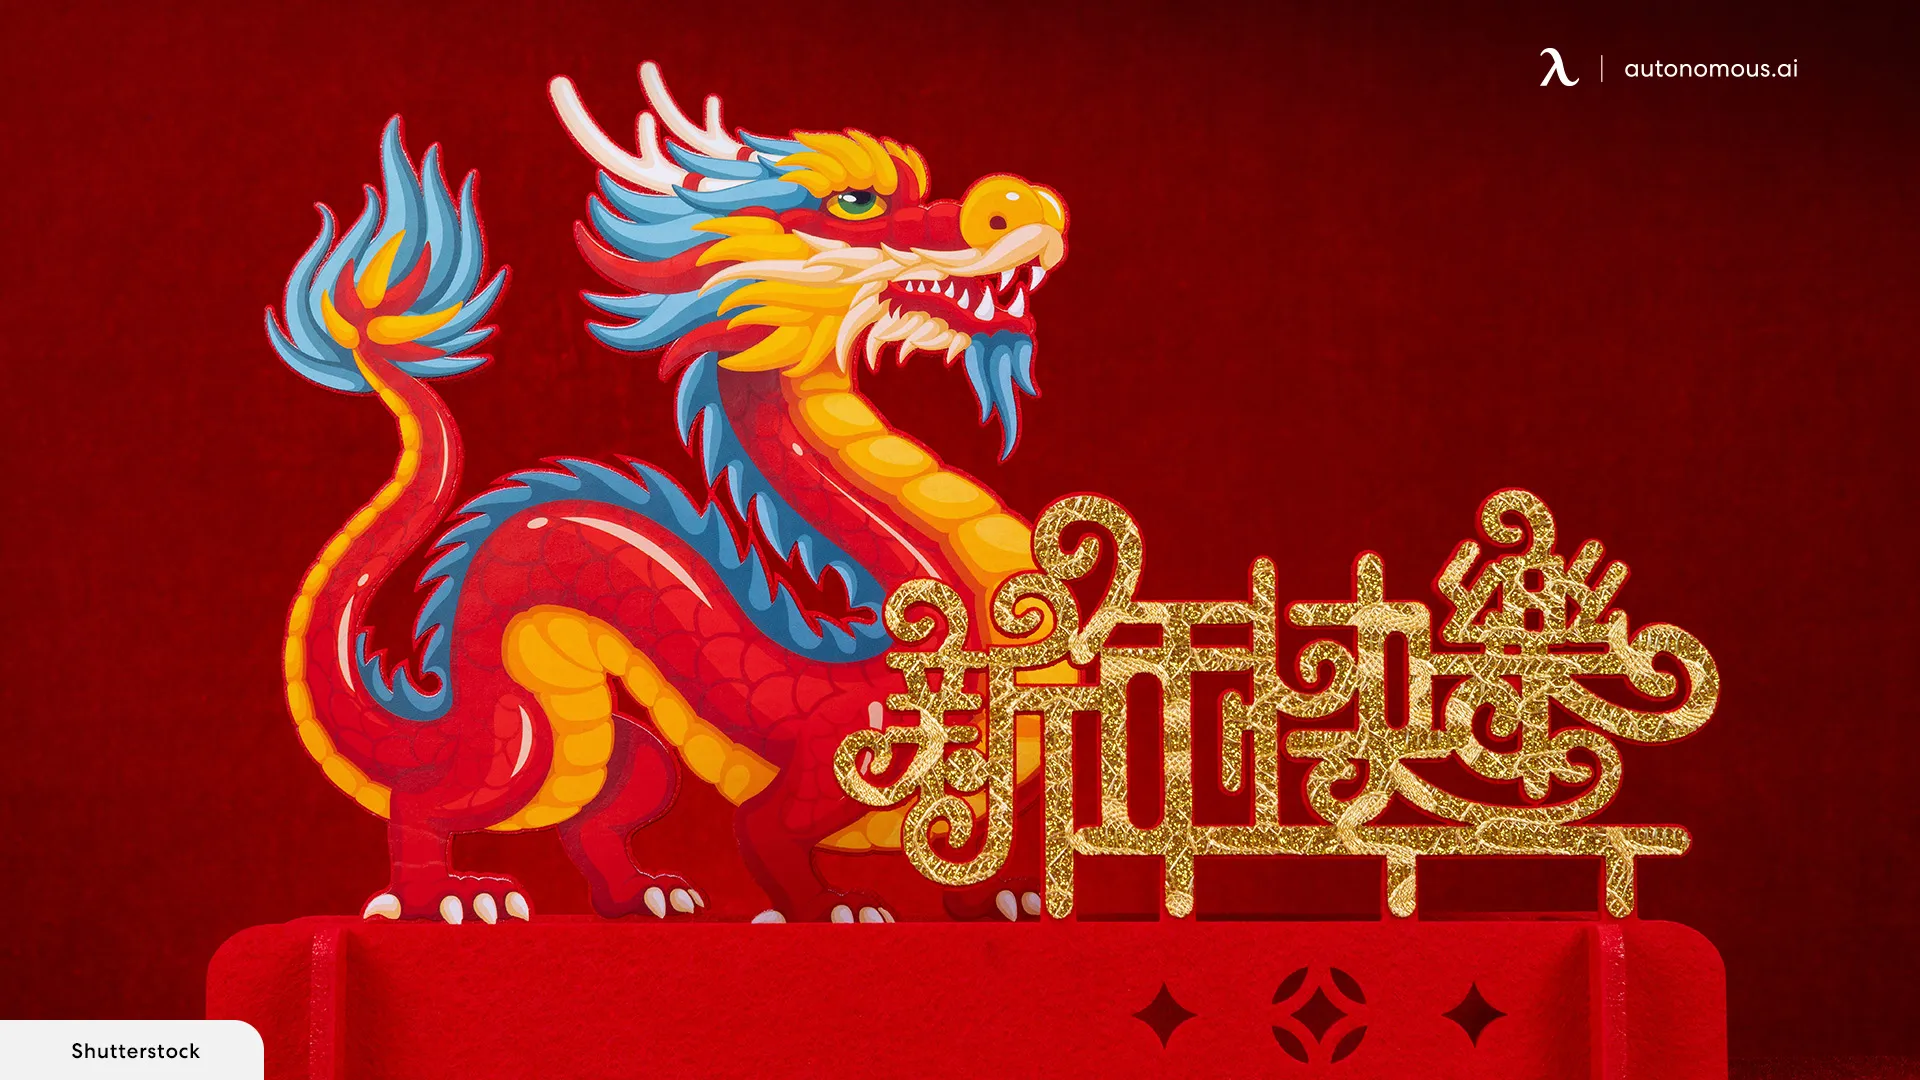 The Symbolism of the Lunar New Year Dragon